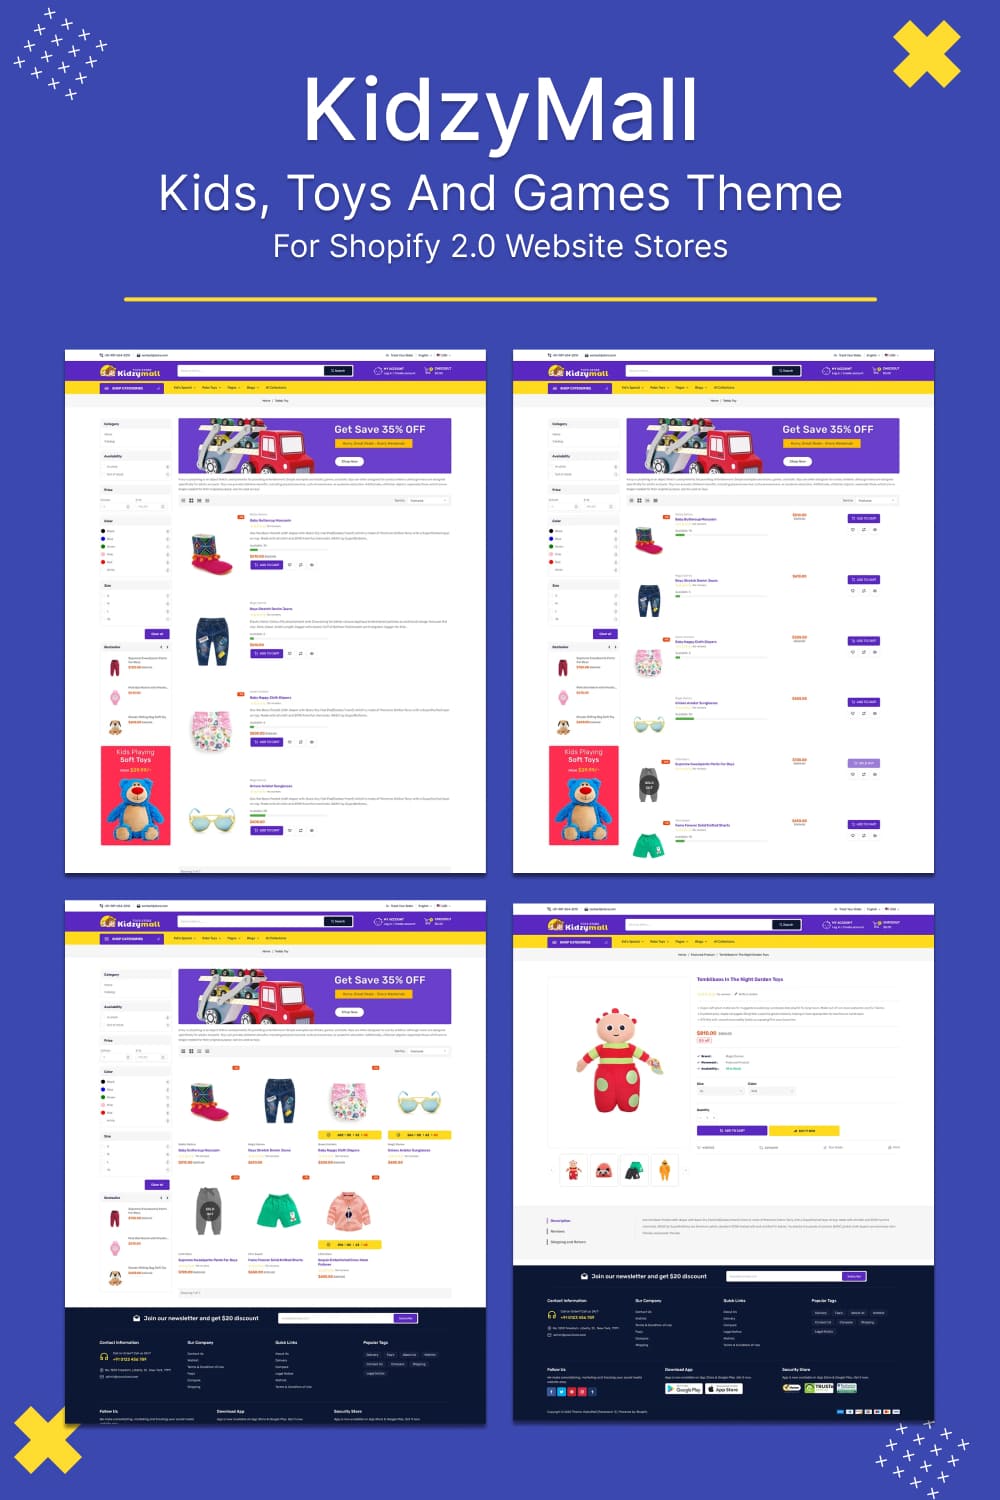 Kidzymall kids toys and games theme for shopify 2.0 website stores, picture for pinterest 1000x1500.